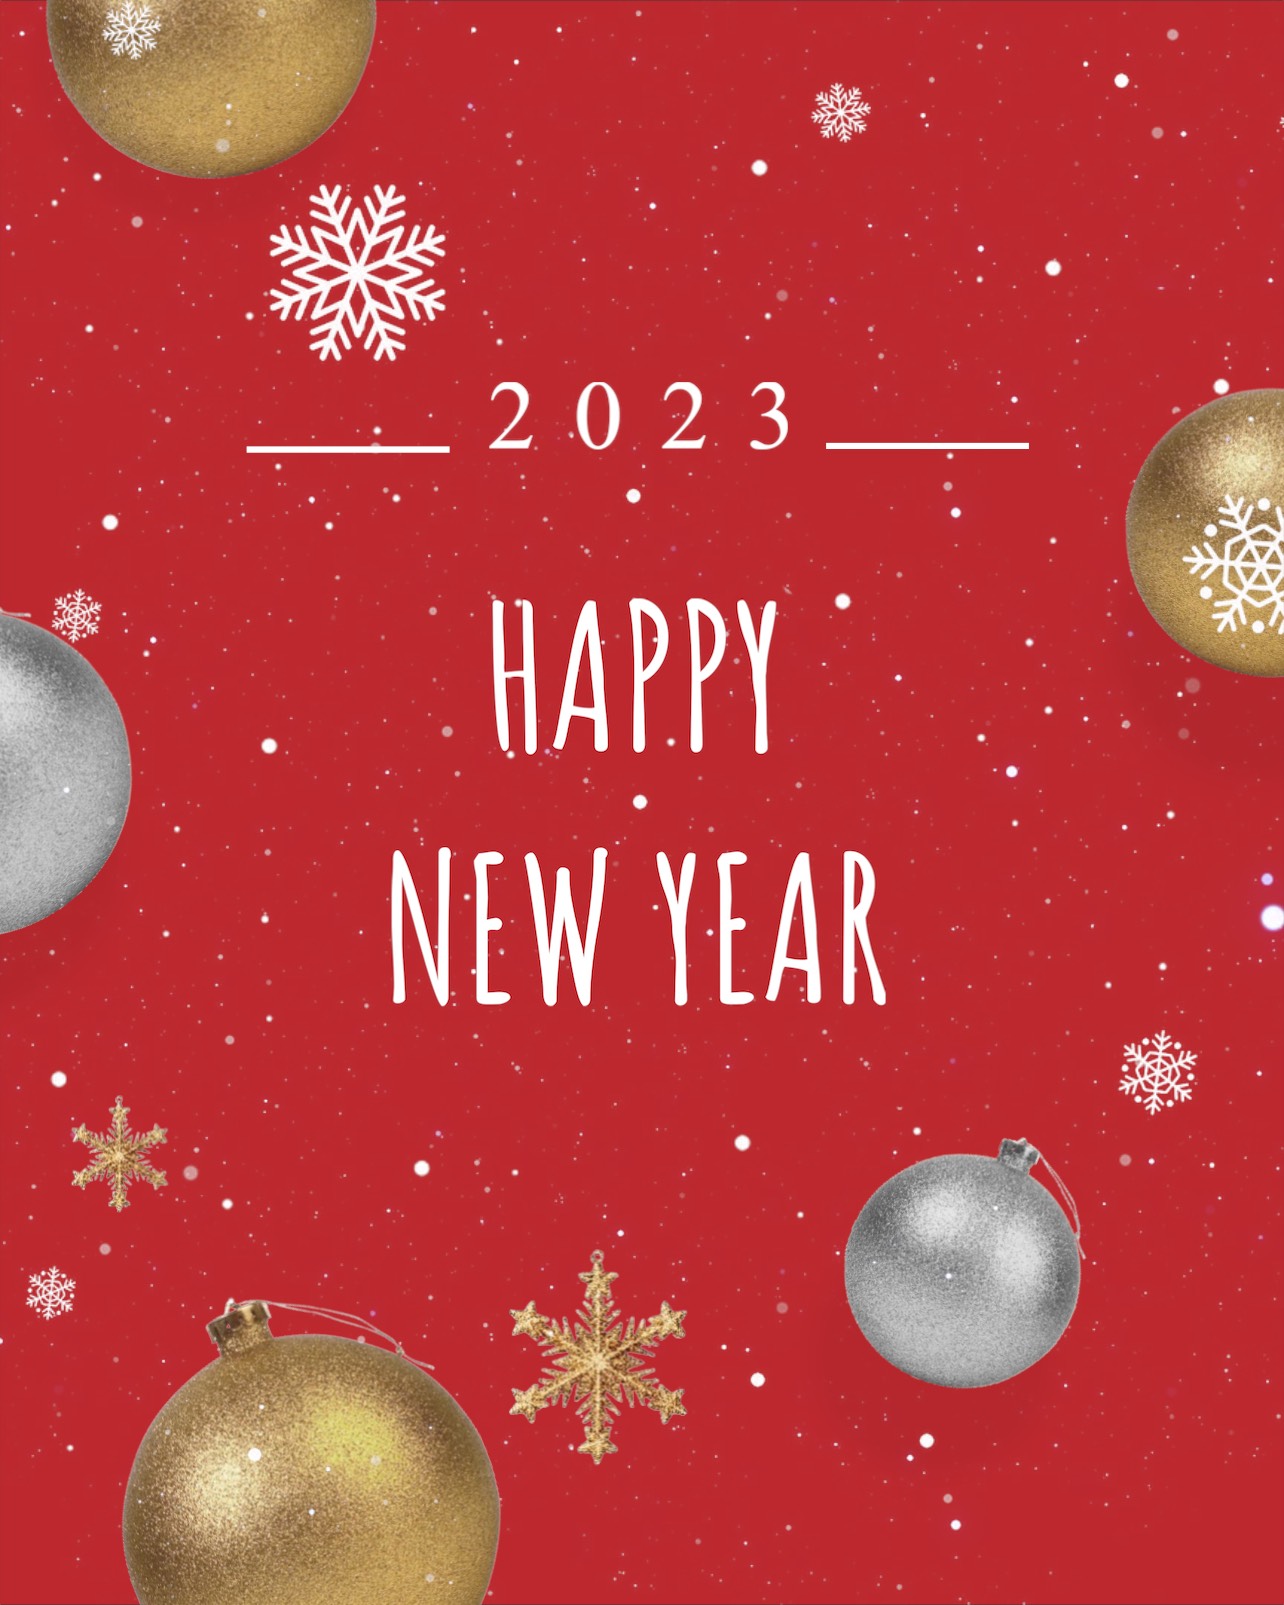 A Red Background With Gold And Silver Ornaments And The Words Happy New Year Happy New Year Template